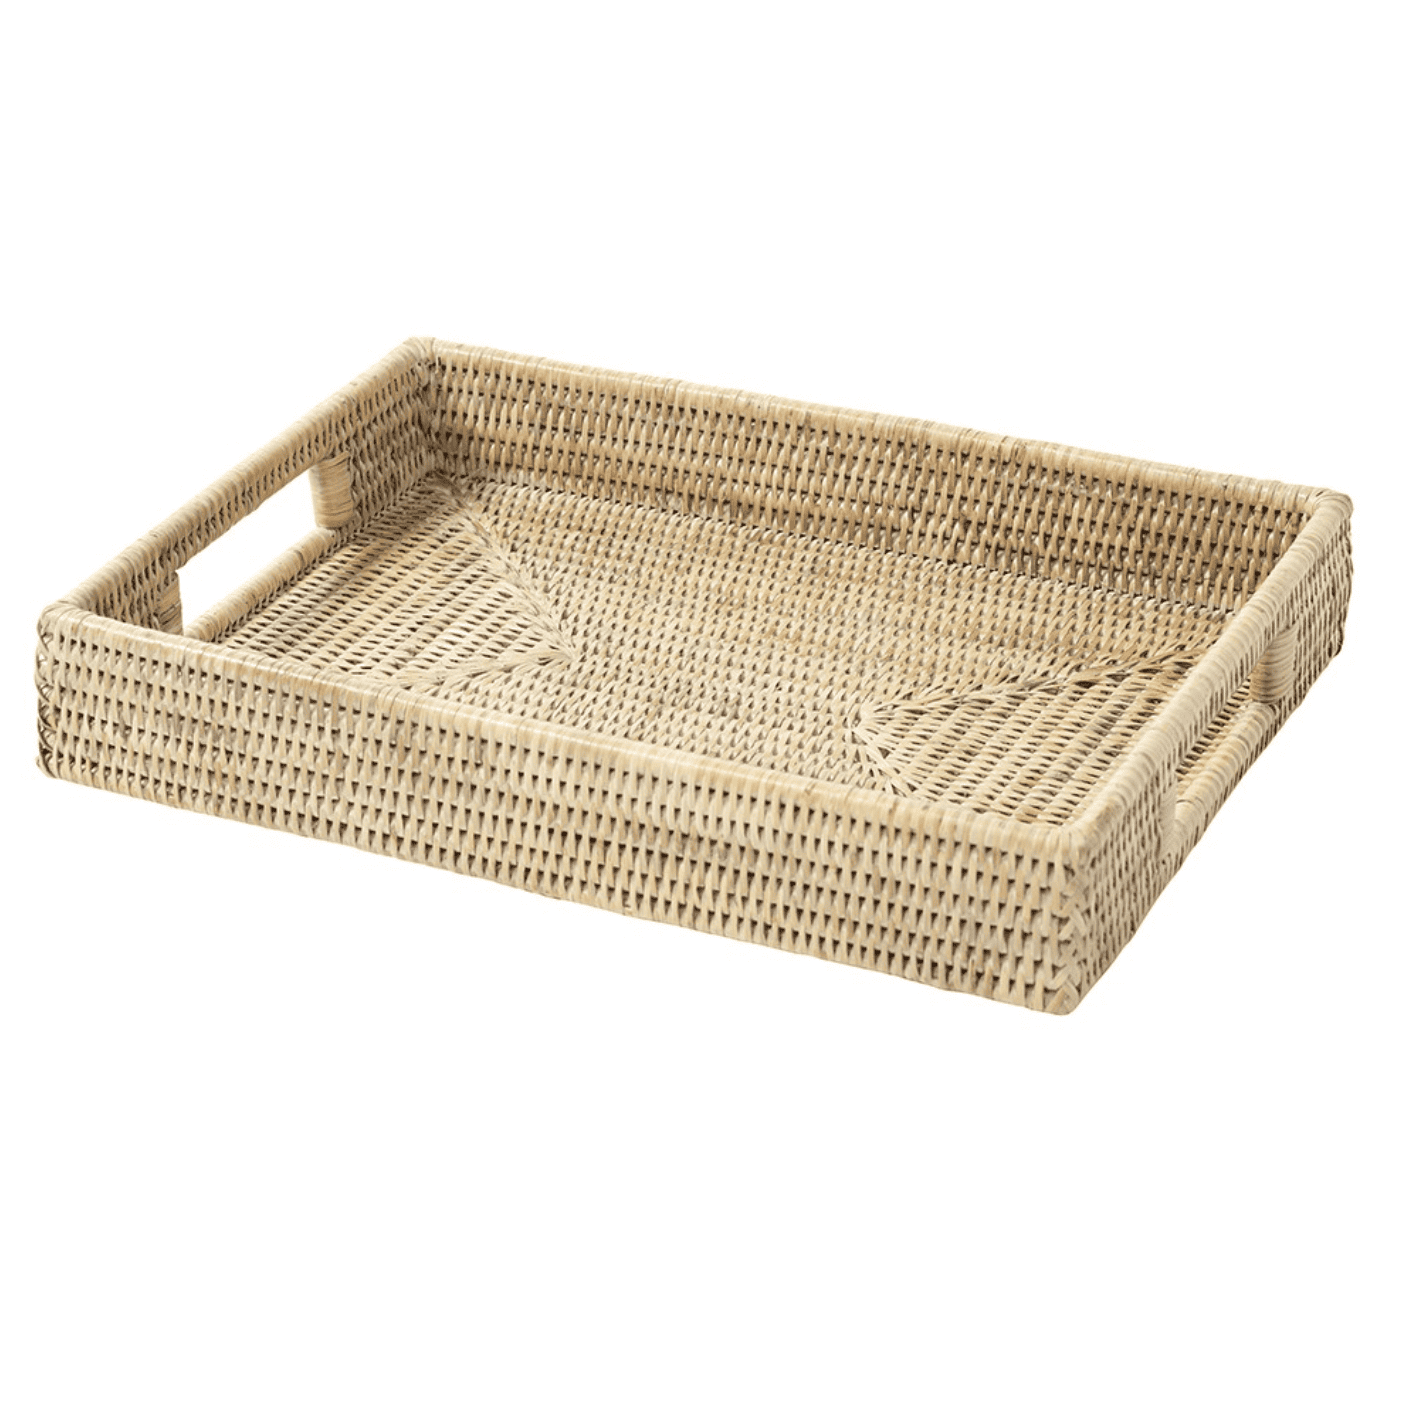 Rectangle rattan tray with handles.